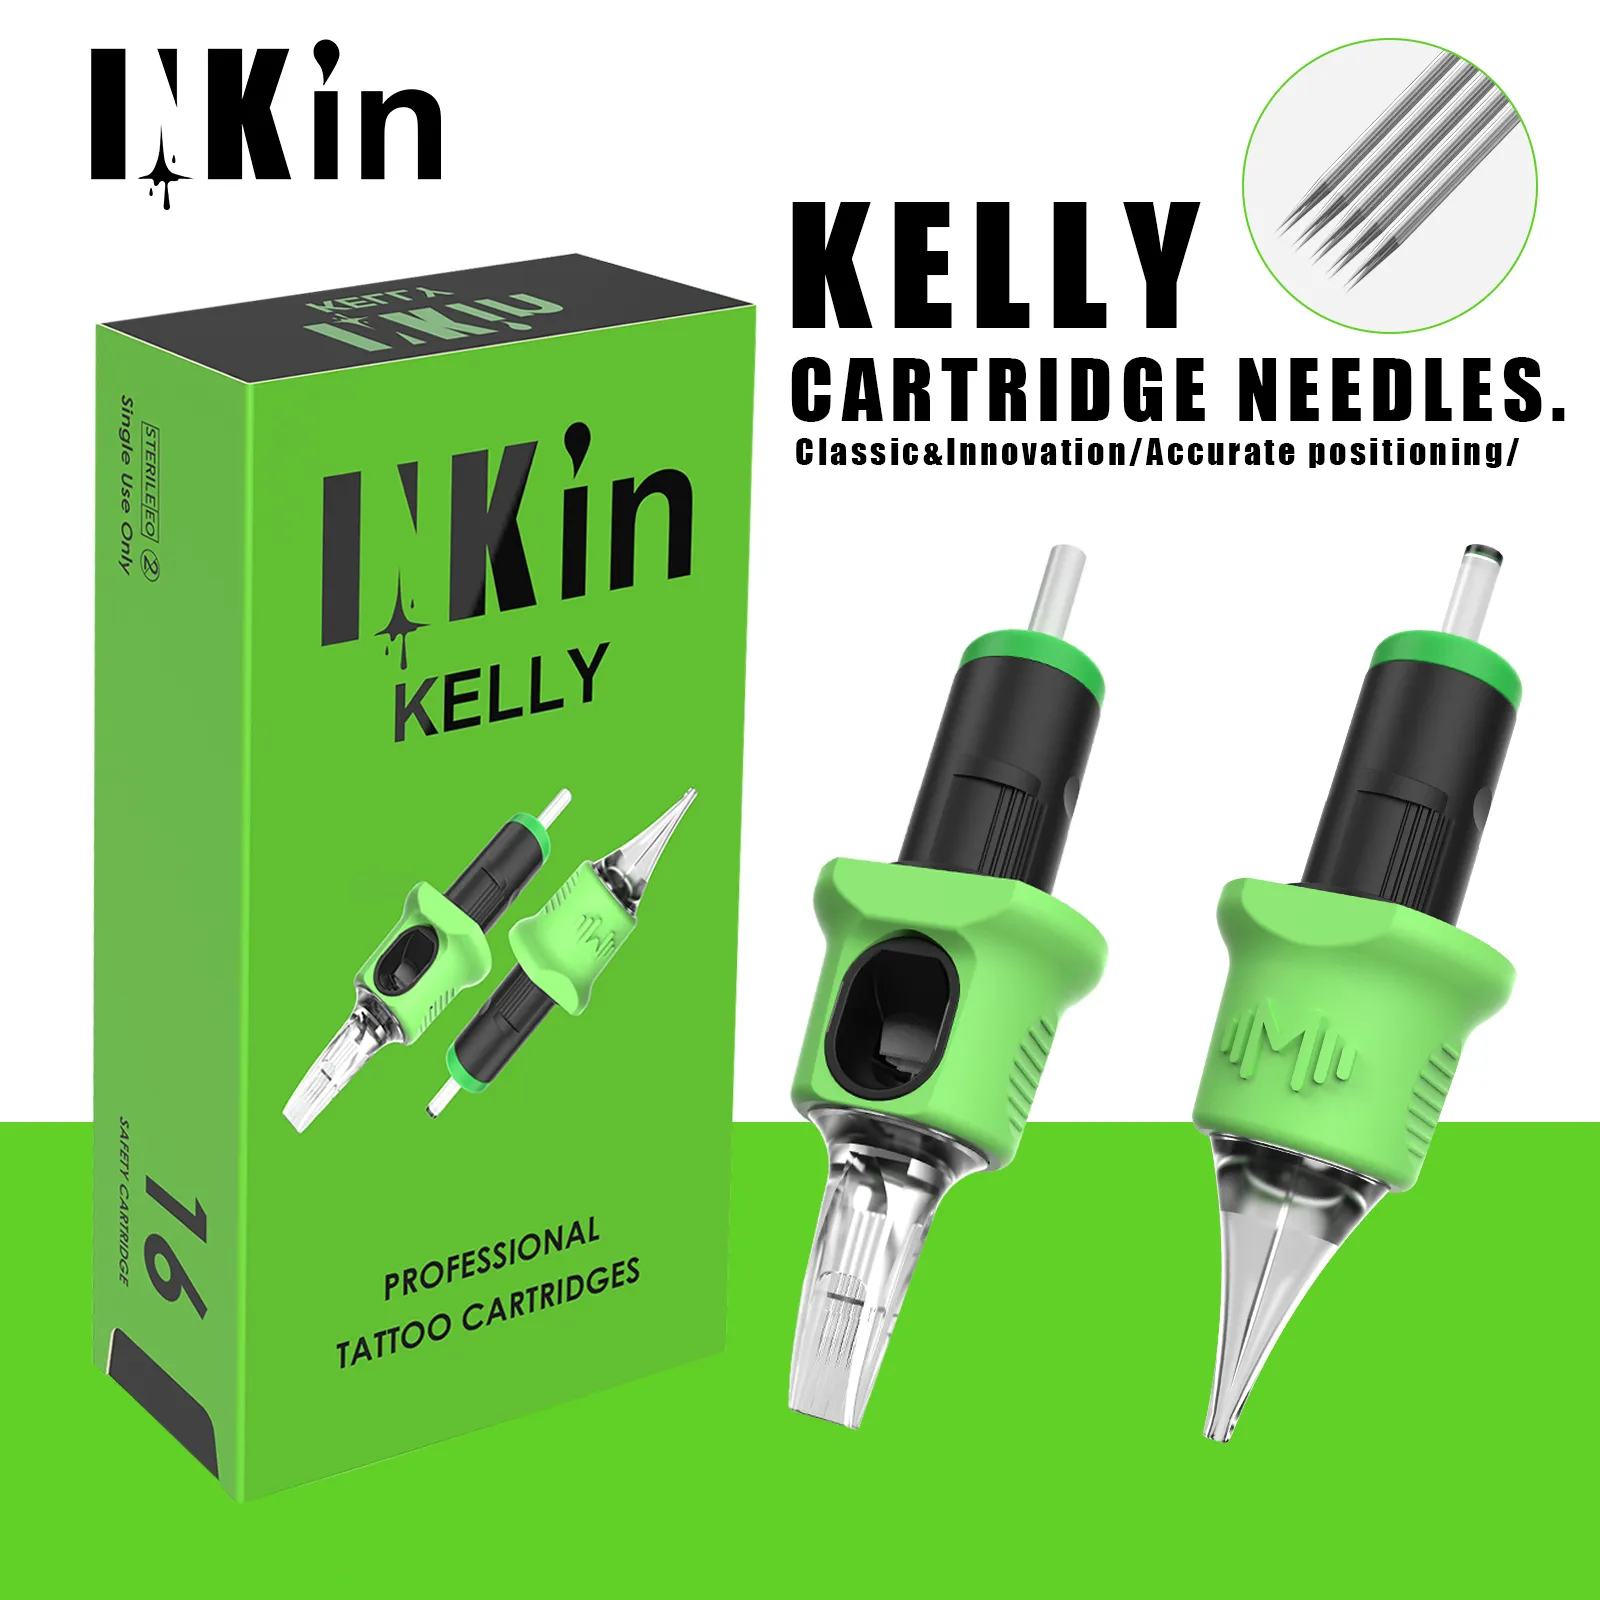 Tattoo Needles 16 Pcs INKIN Kelly Tattoo Cartridge Needles Finger Ledge Classic Innovation Accurate Positioning Needles Liner Shader Thermal 230907